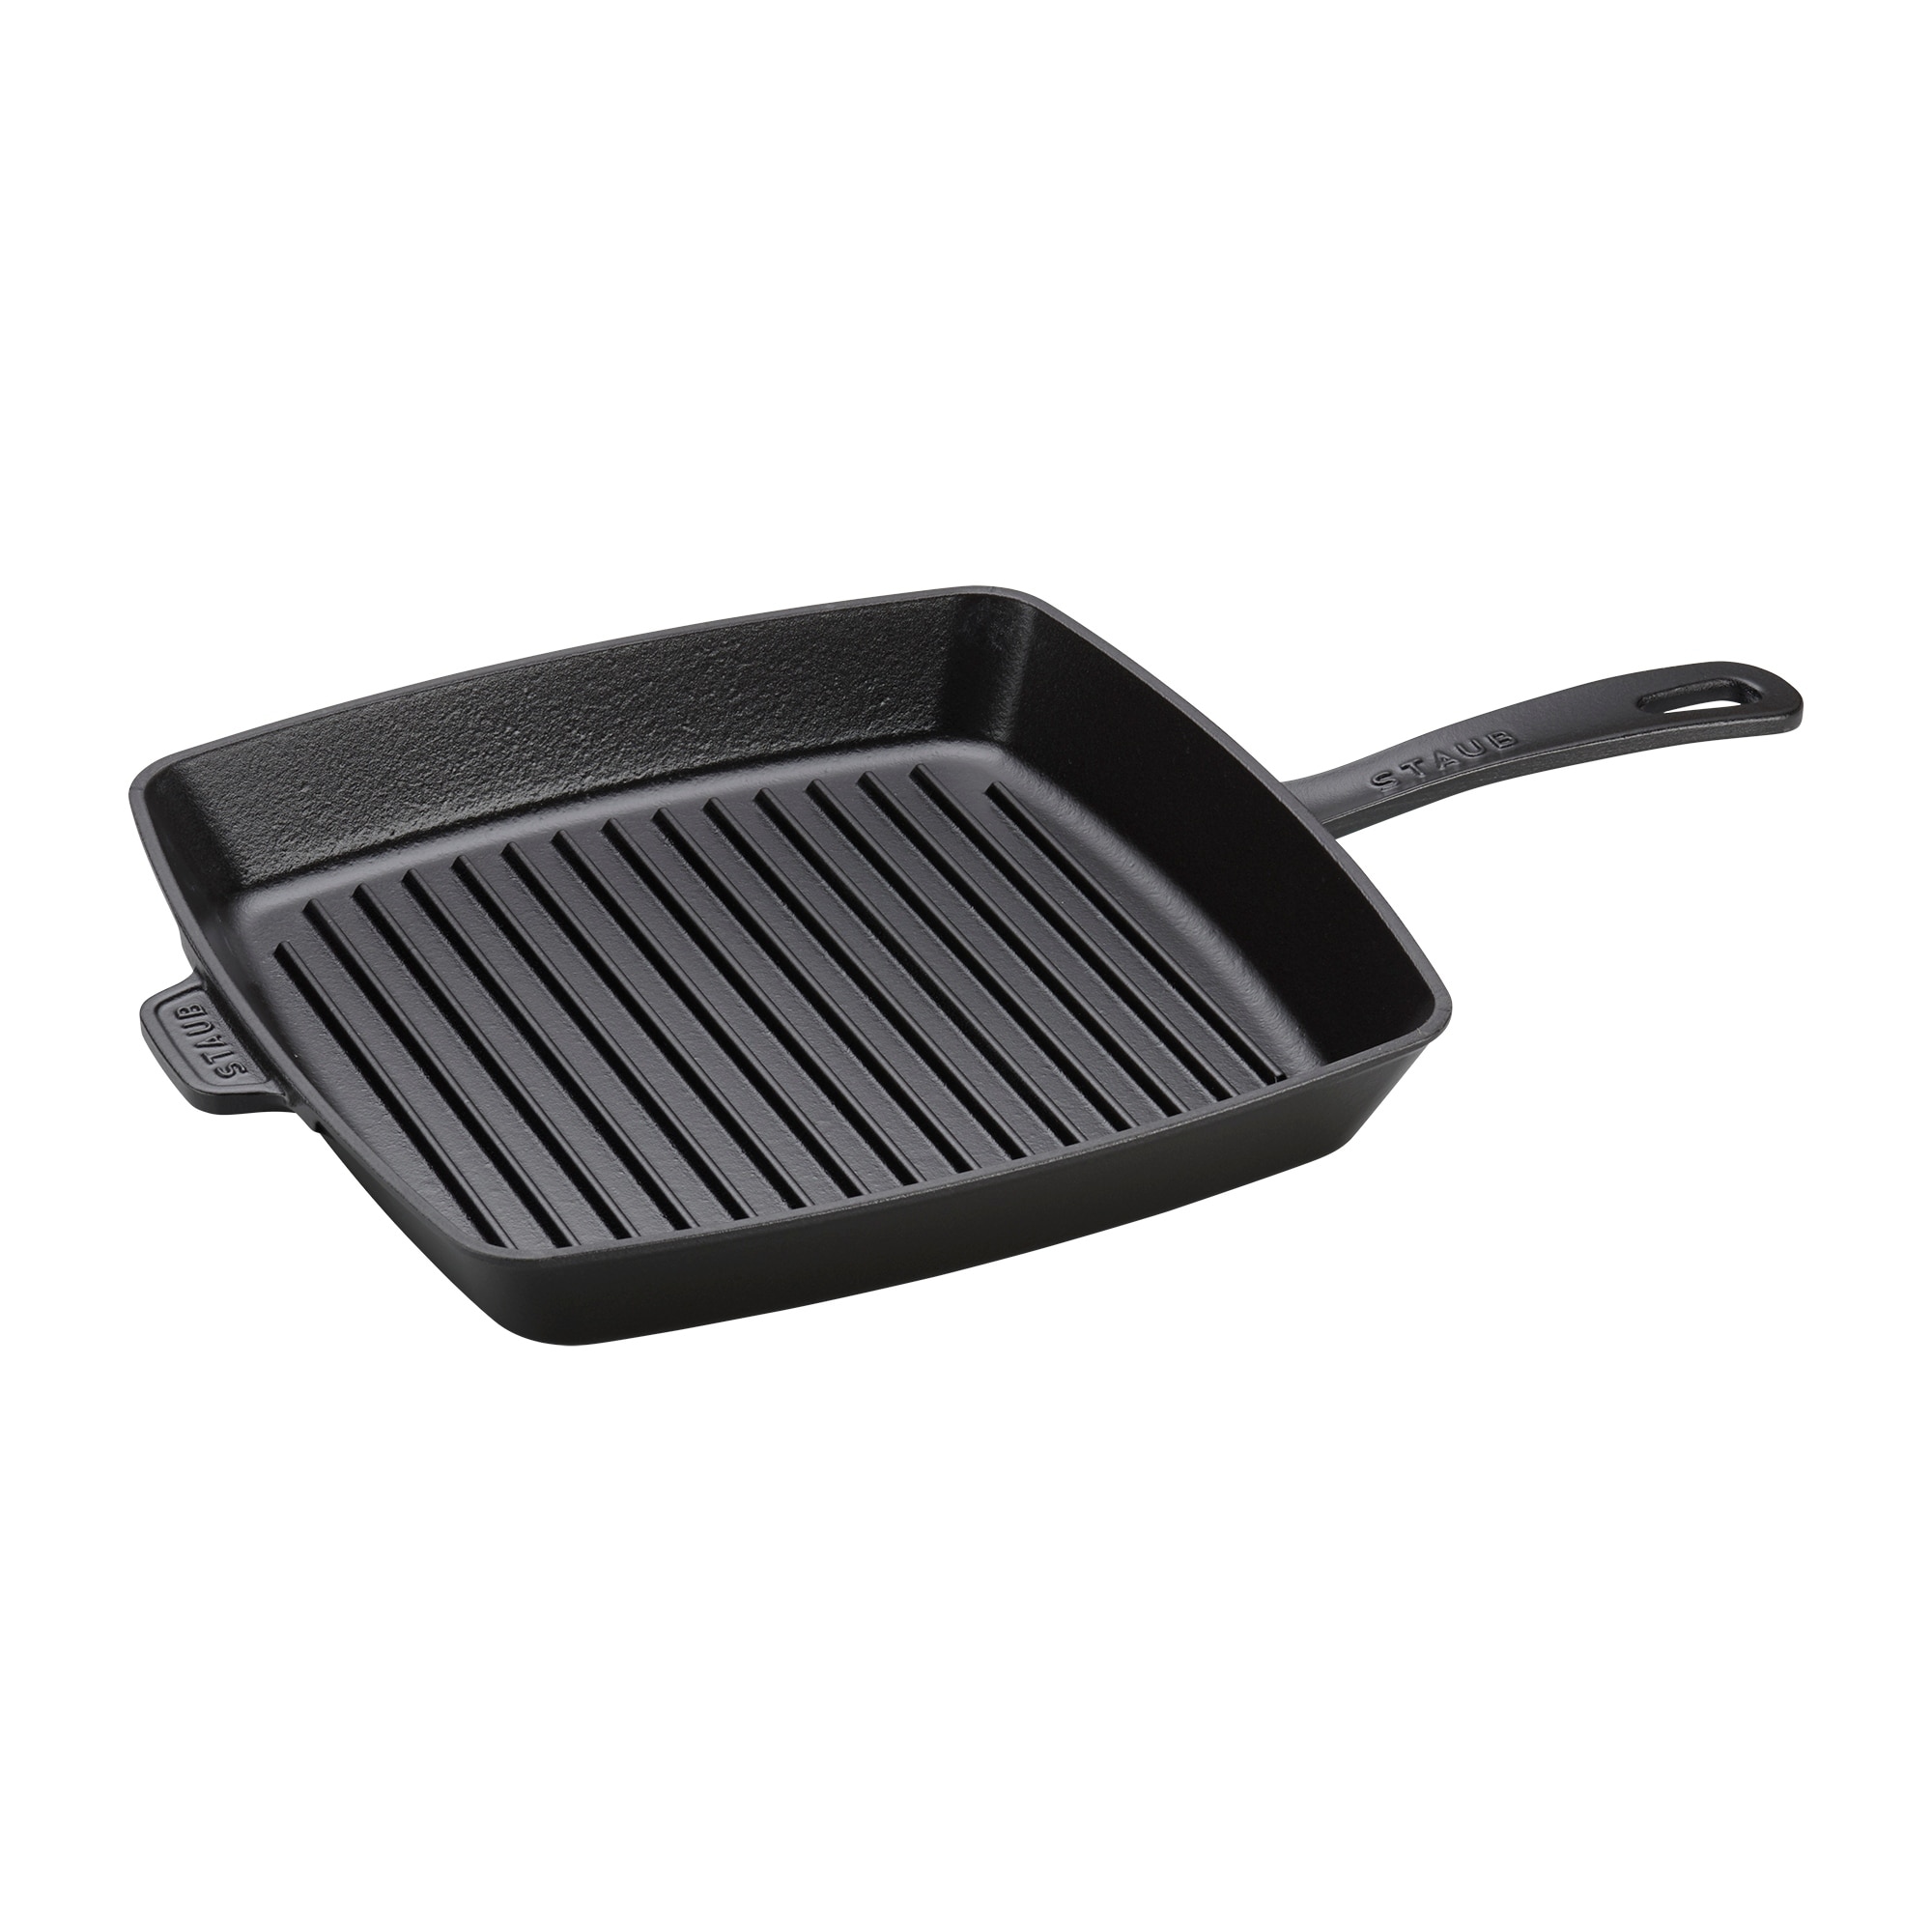 https://ak1.ostkcdn.com/images/products/is/images/direct/364b1420febbd6c13e8d2bb78c26569d725b36ed/Staub-Cast-Iron-12-inch-Square-Grill-Pan.jpg